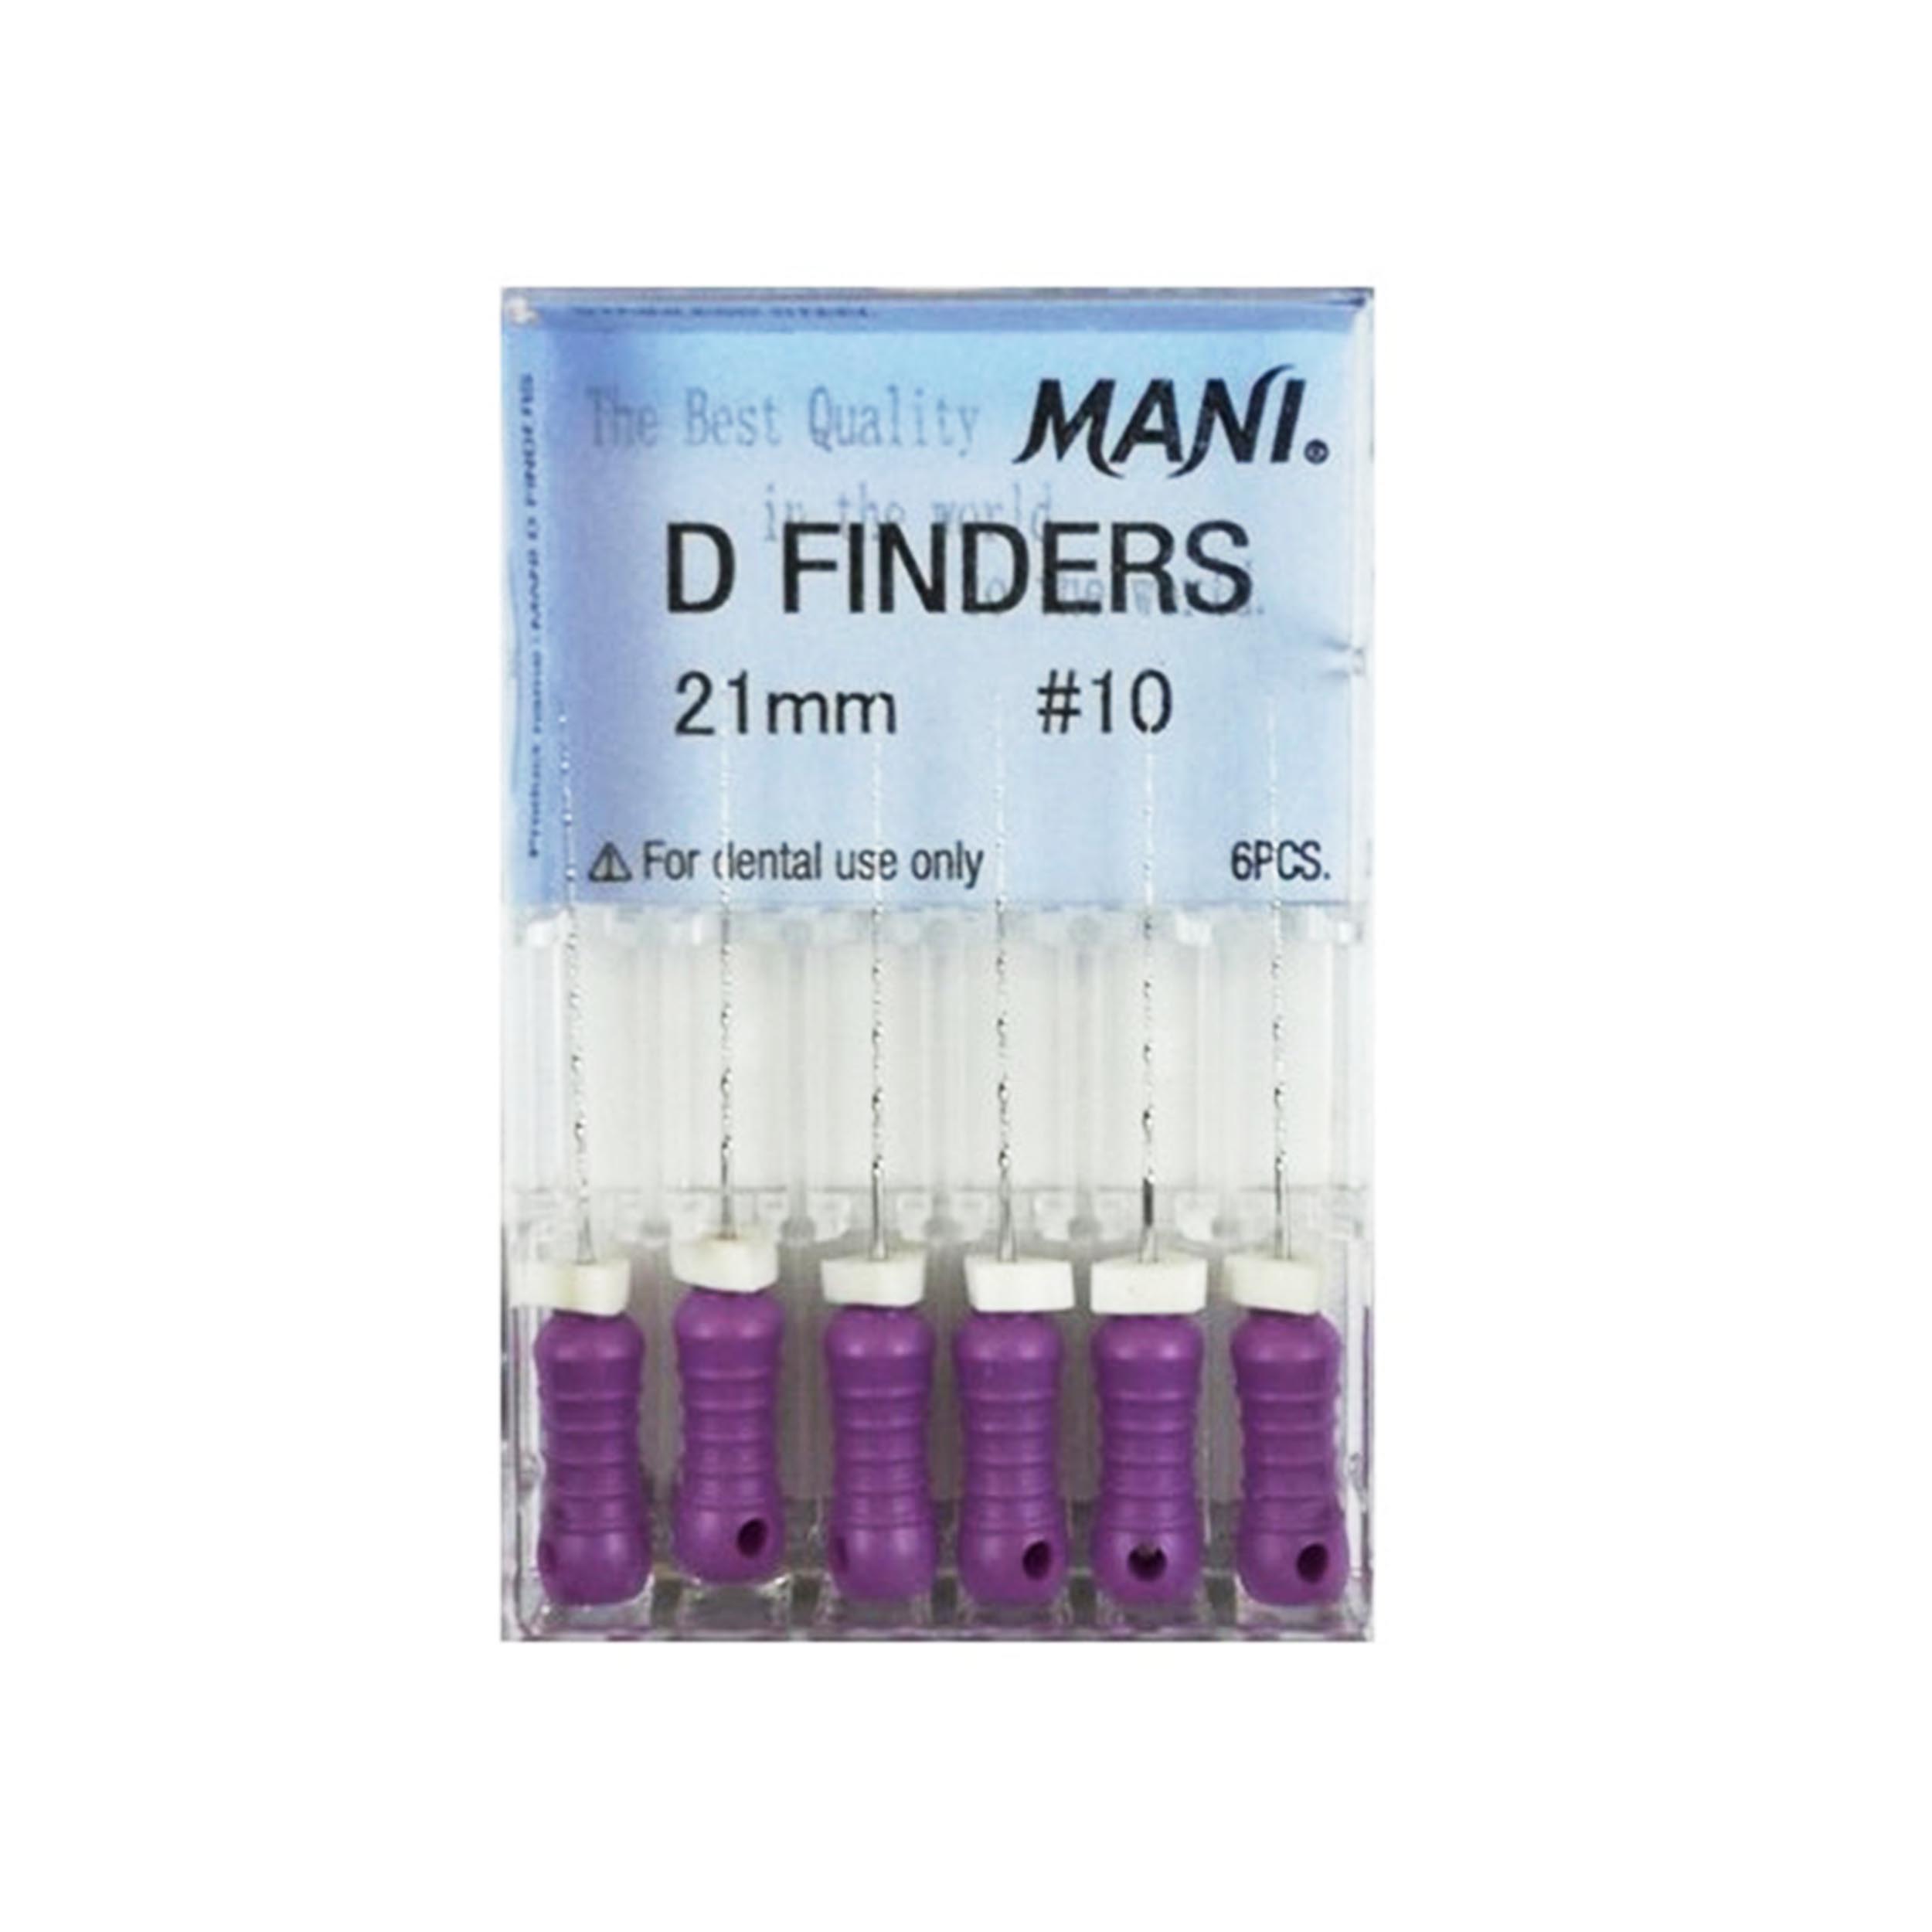 Mani D Finder Root Canal Files 15 (21mm)